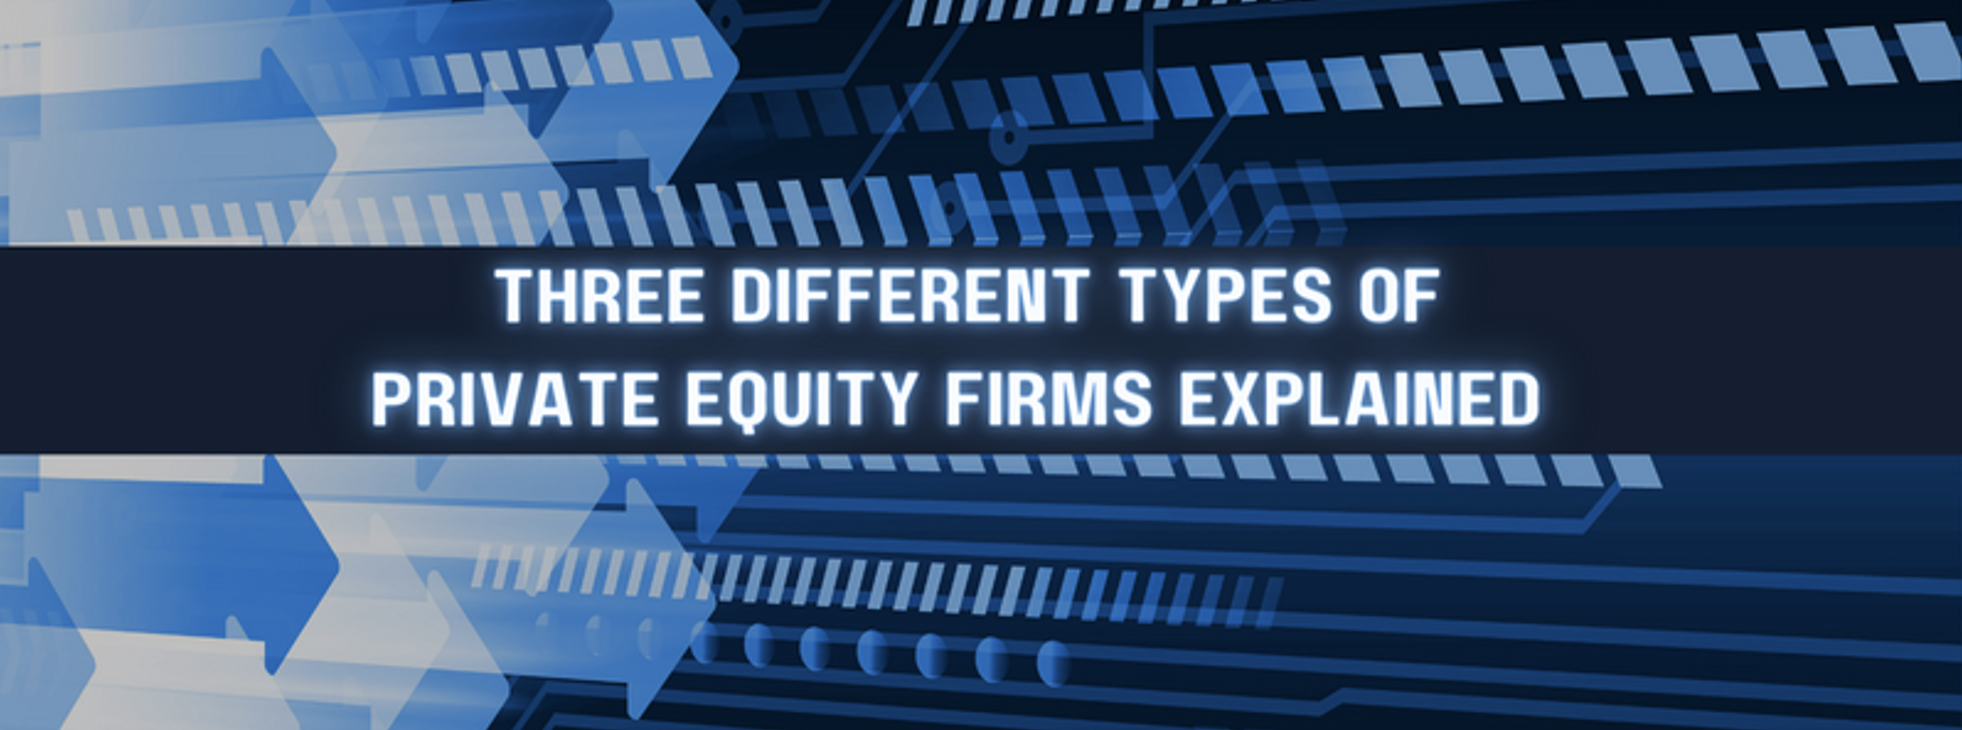 3 Different Types of Private Equity Firms Explained